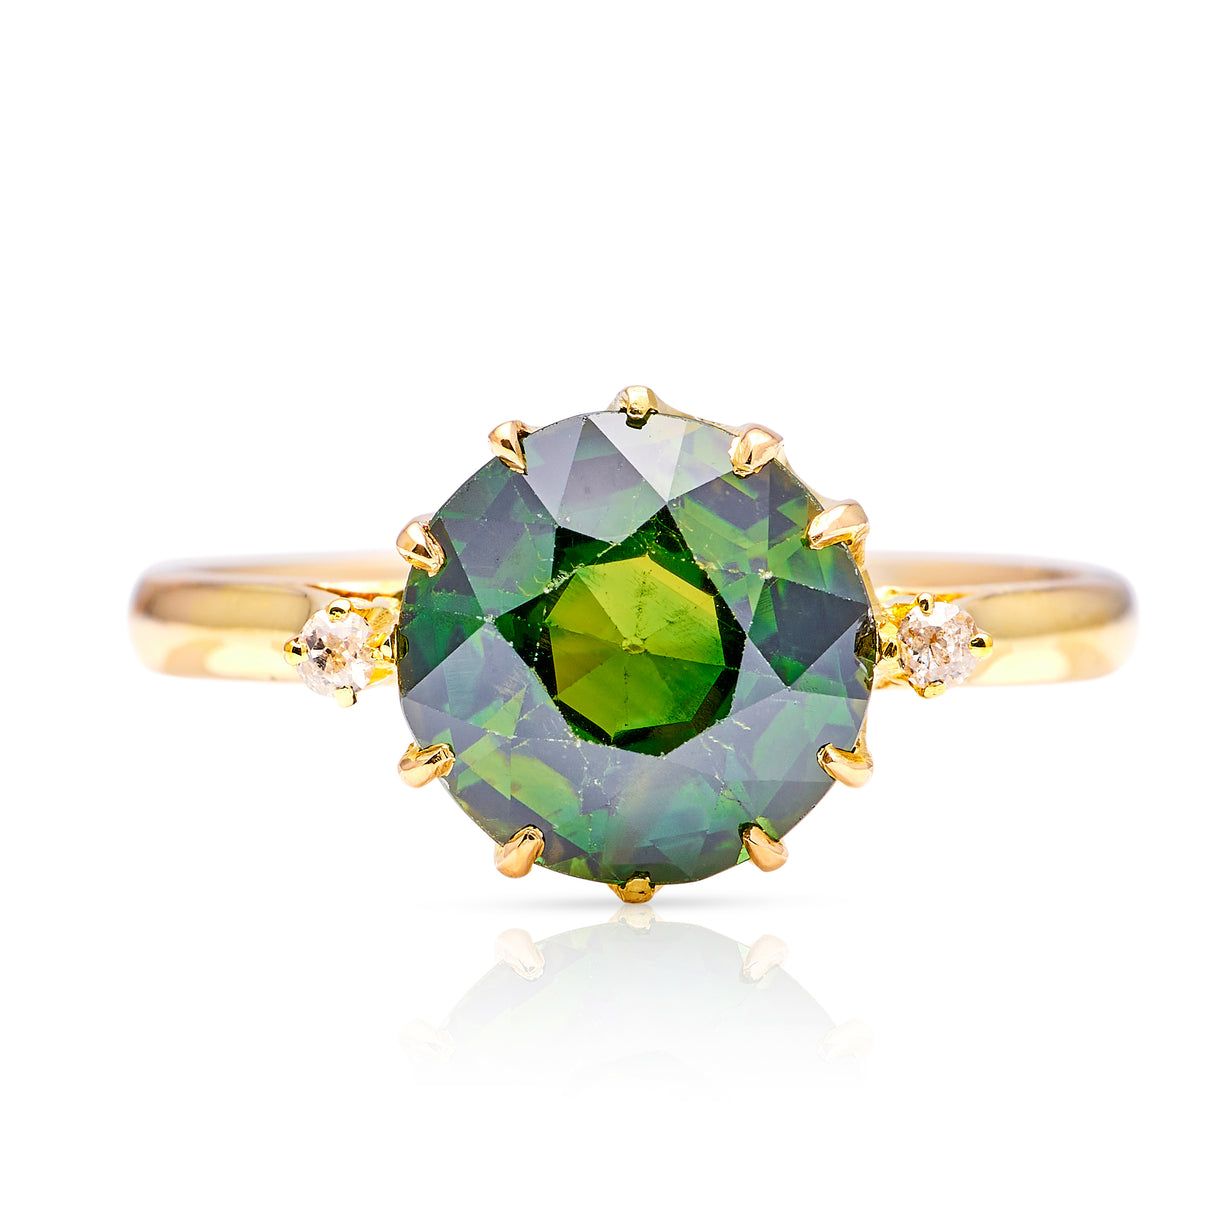 Antique, Edwardian green sapphire and diamond three-stone ring, 18ct yellow gold